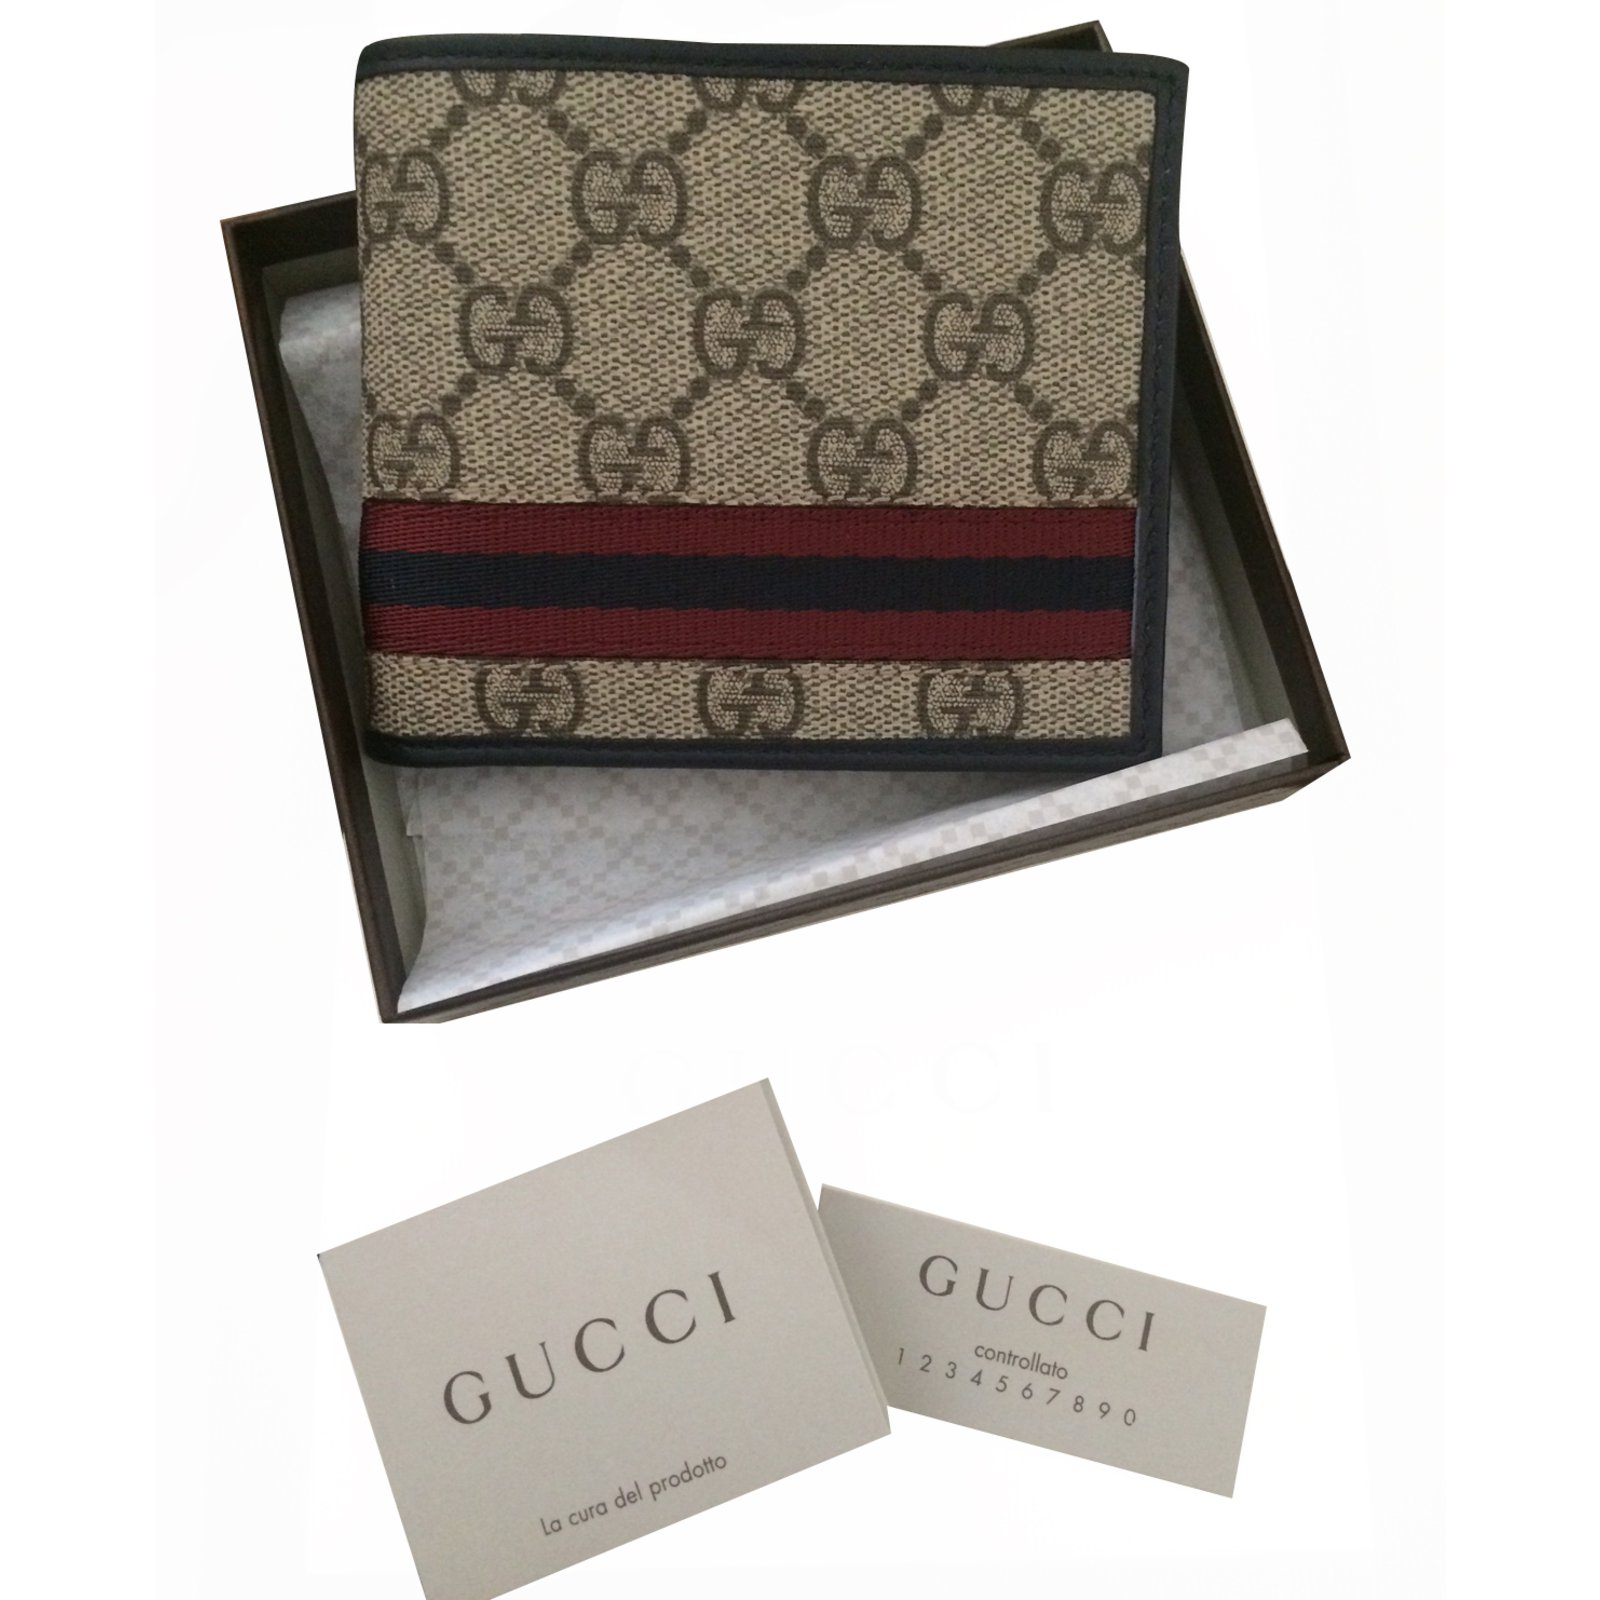 gucci mens wallet red